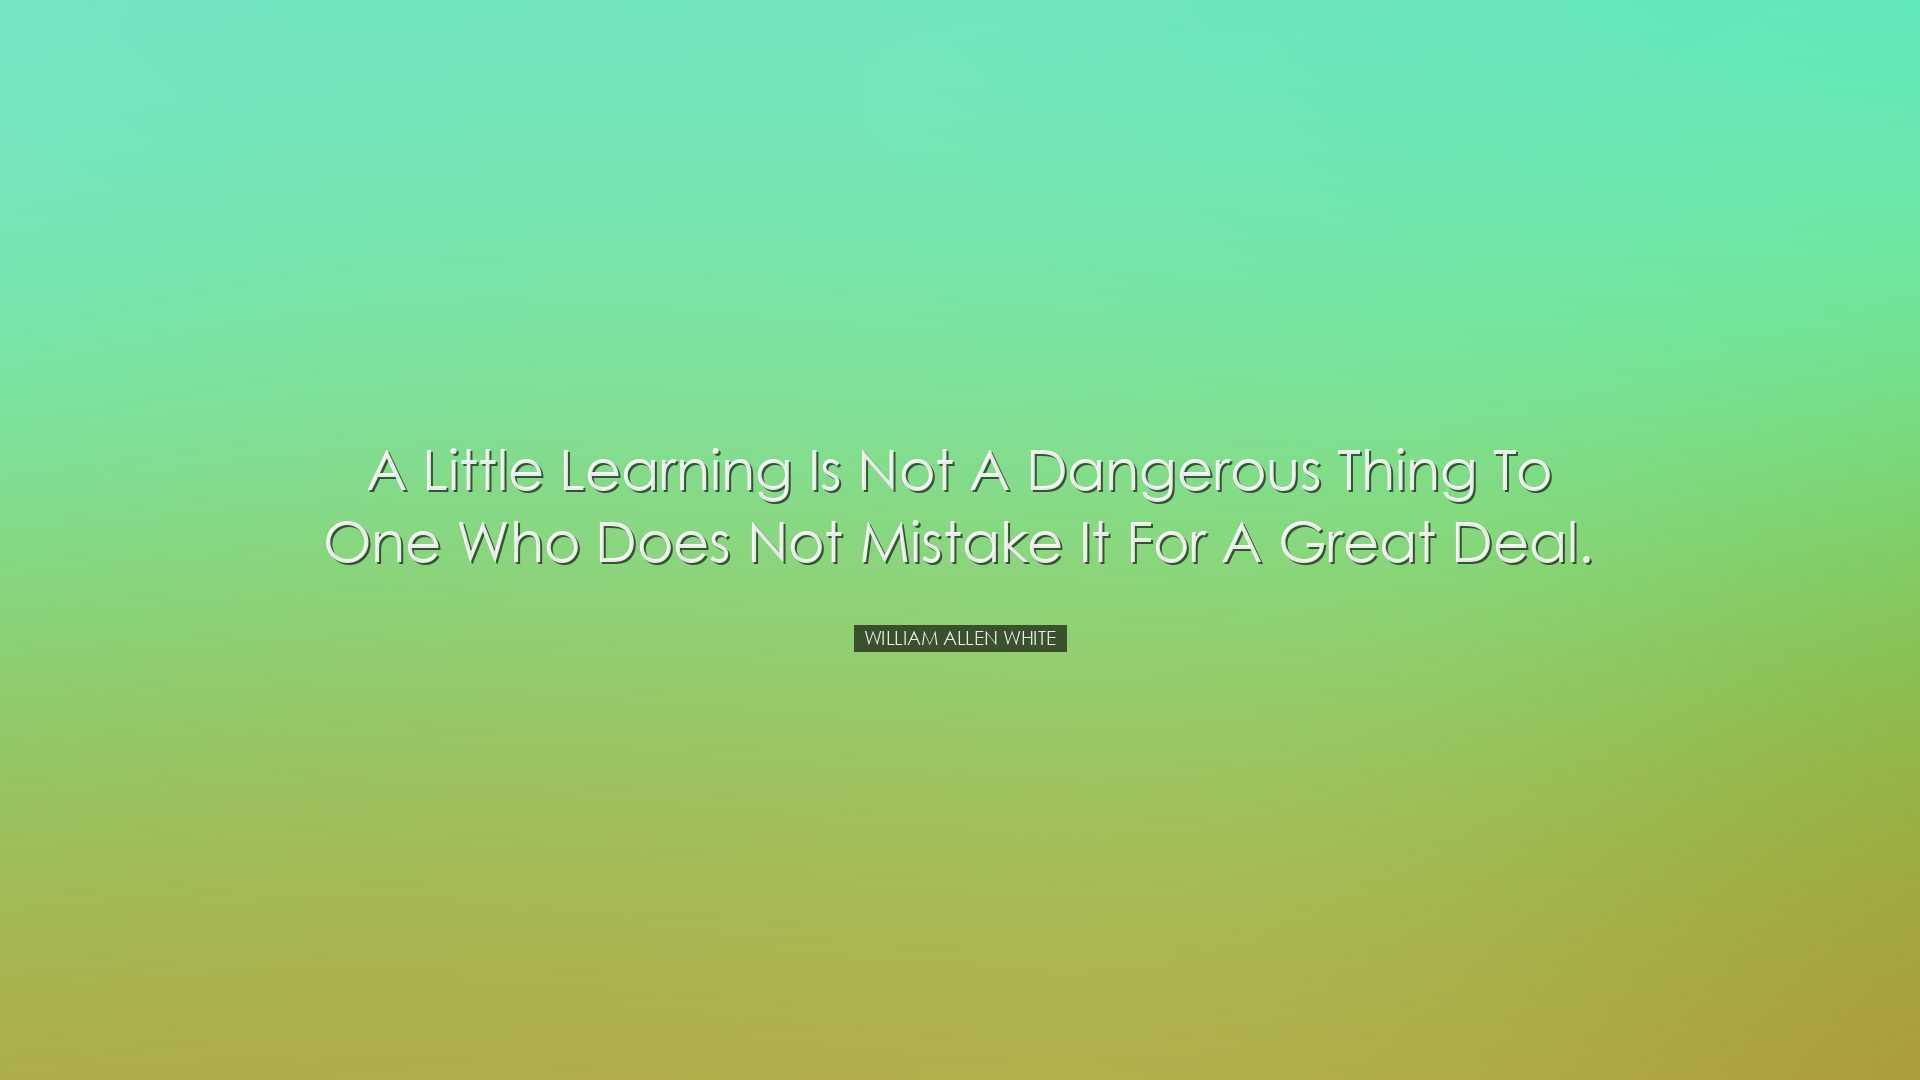 A little learning is not a dangerous thing to one who does not mis